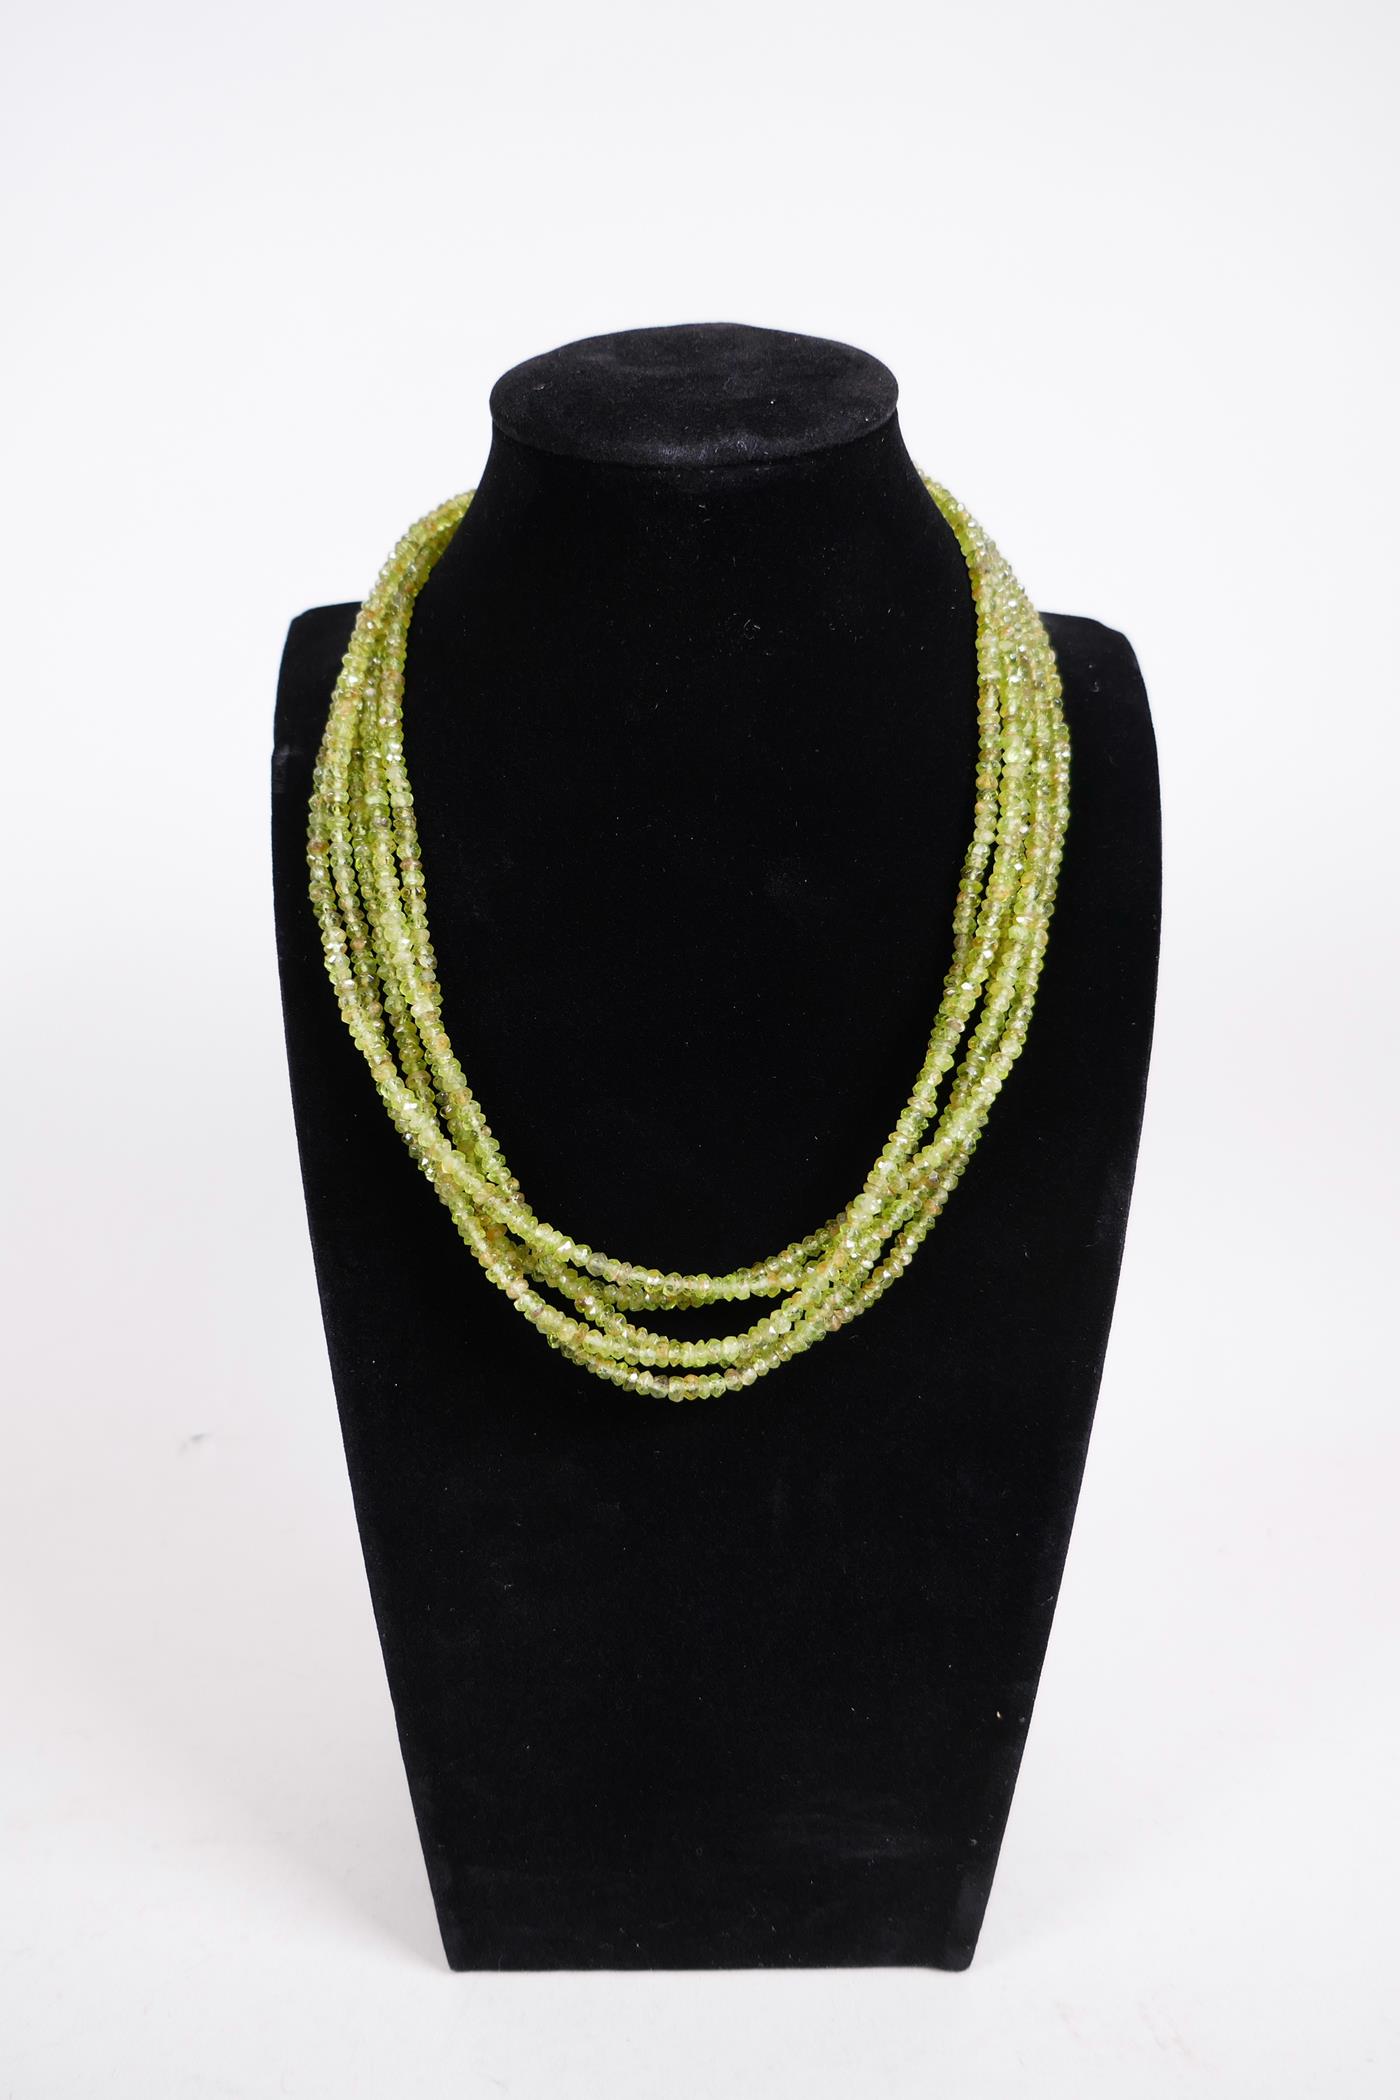 A four row green peridot gemstone necklace, with adjustable silver clasp, 18" long - Image 2 of 8